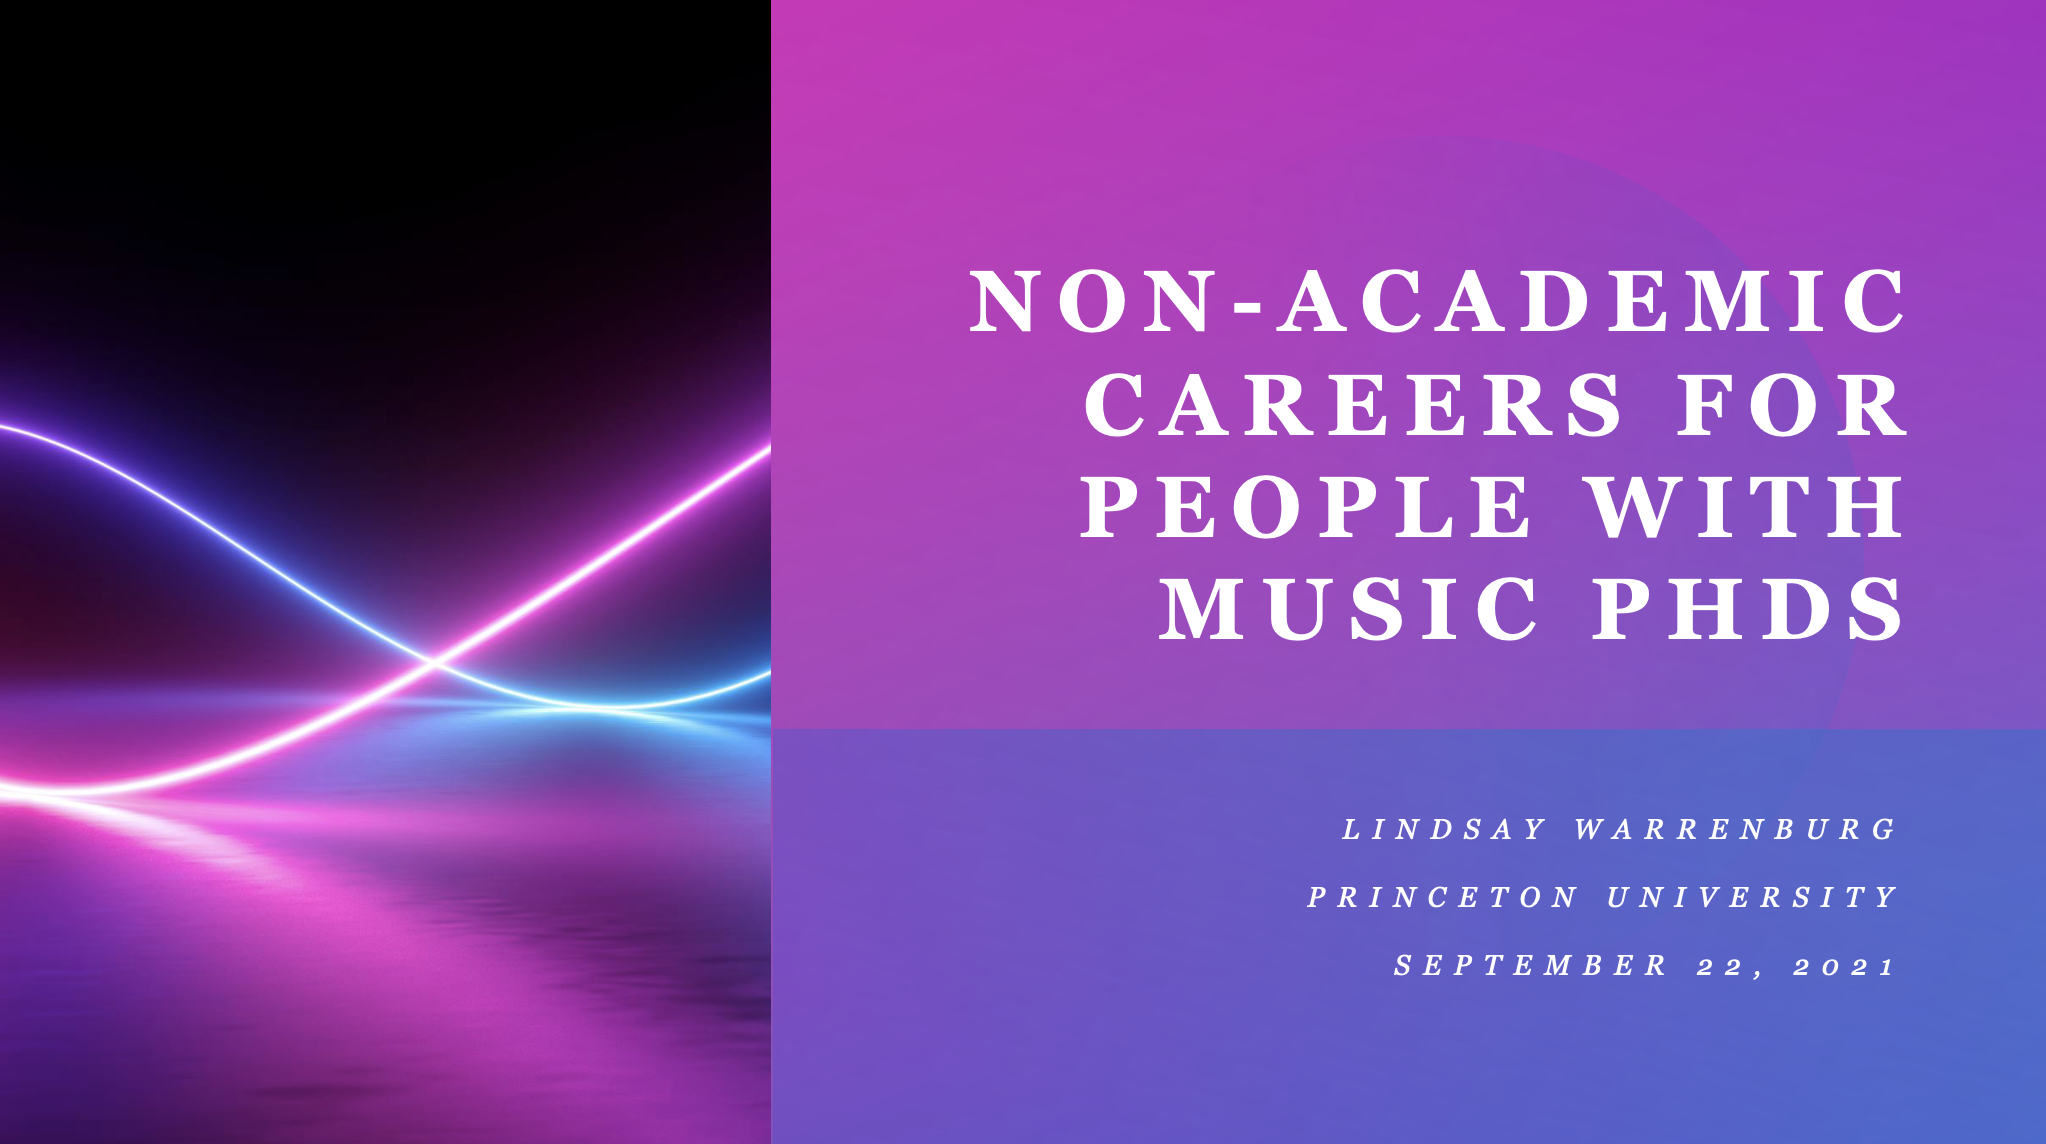 Non-academic Careers for People with Music PhDs